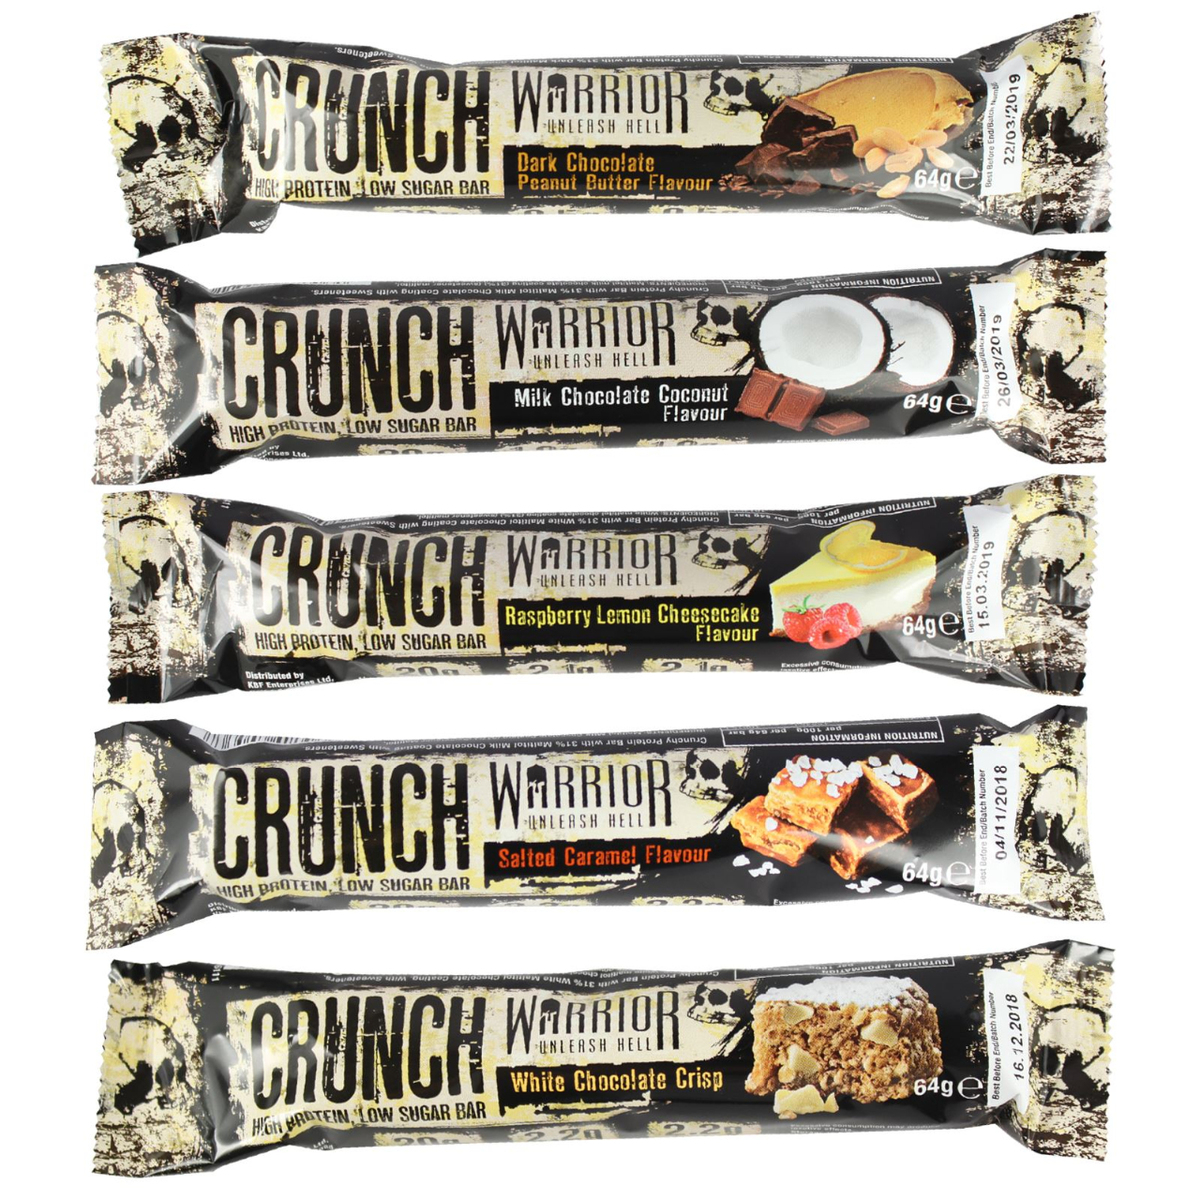 Different flavours of Warrior crunch bars